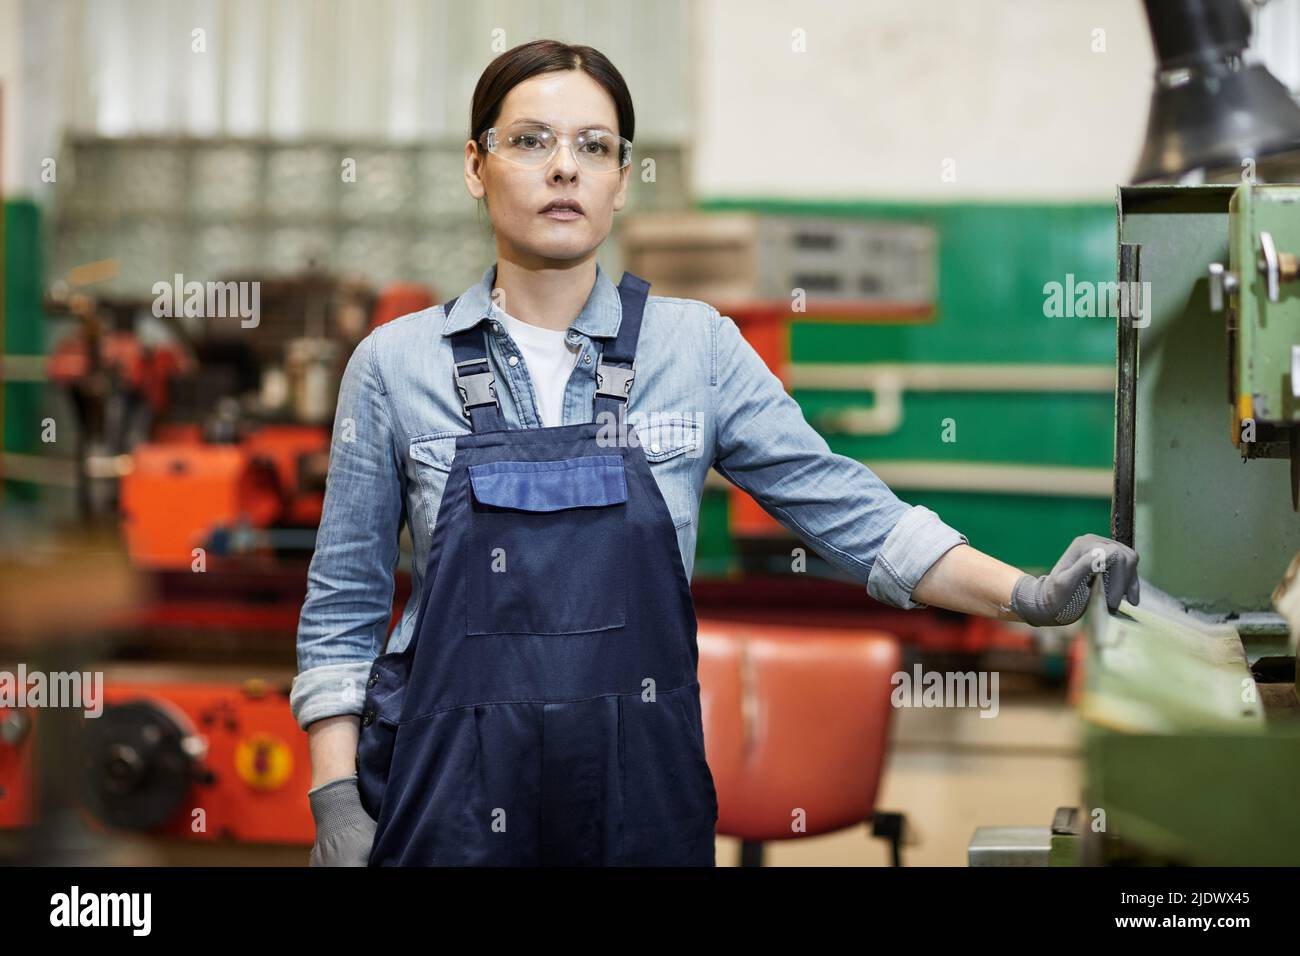 Pensive gritty female manufacturing engineer in blue overalls wearing protective goggles and gloves standing at factory machine Stock Photo